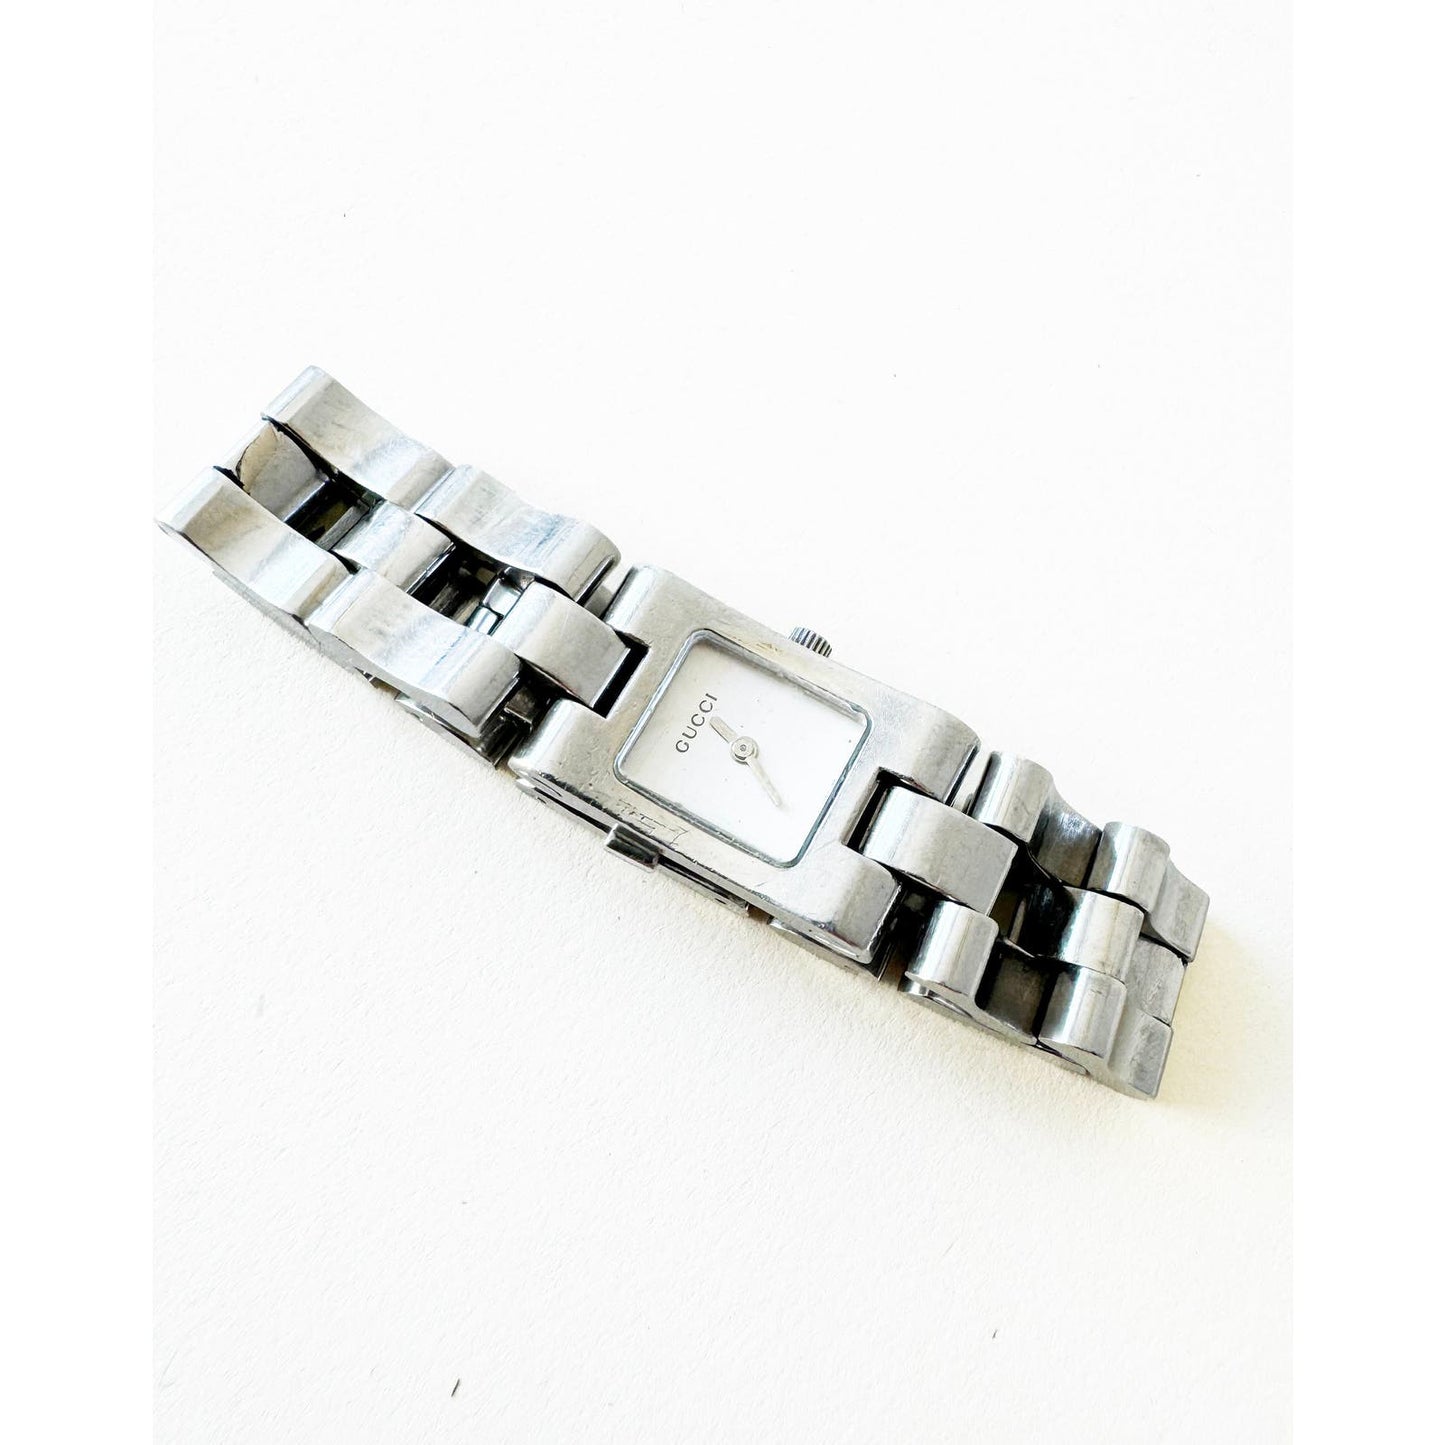 Vintage Gucci Silver Chain Bracelet Watch with Square Face